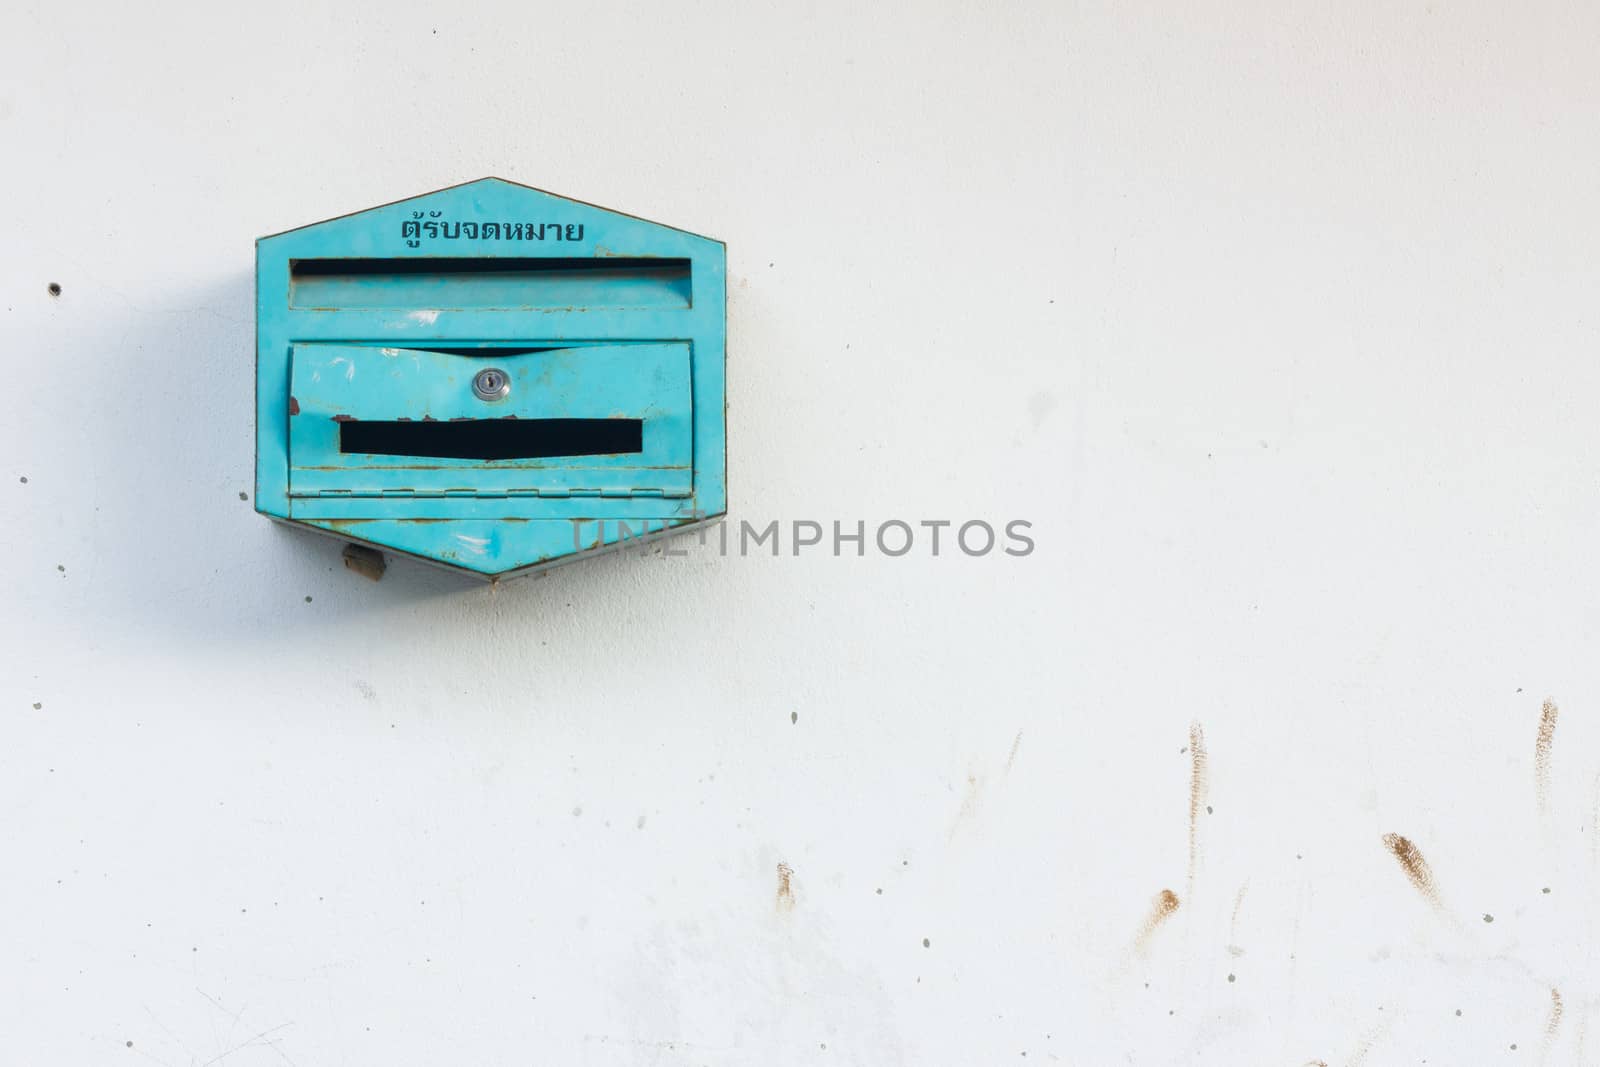 mailbox by a3701027